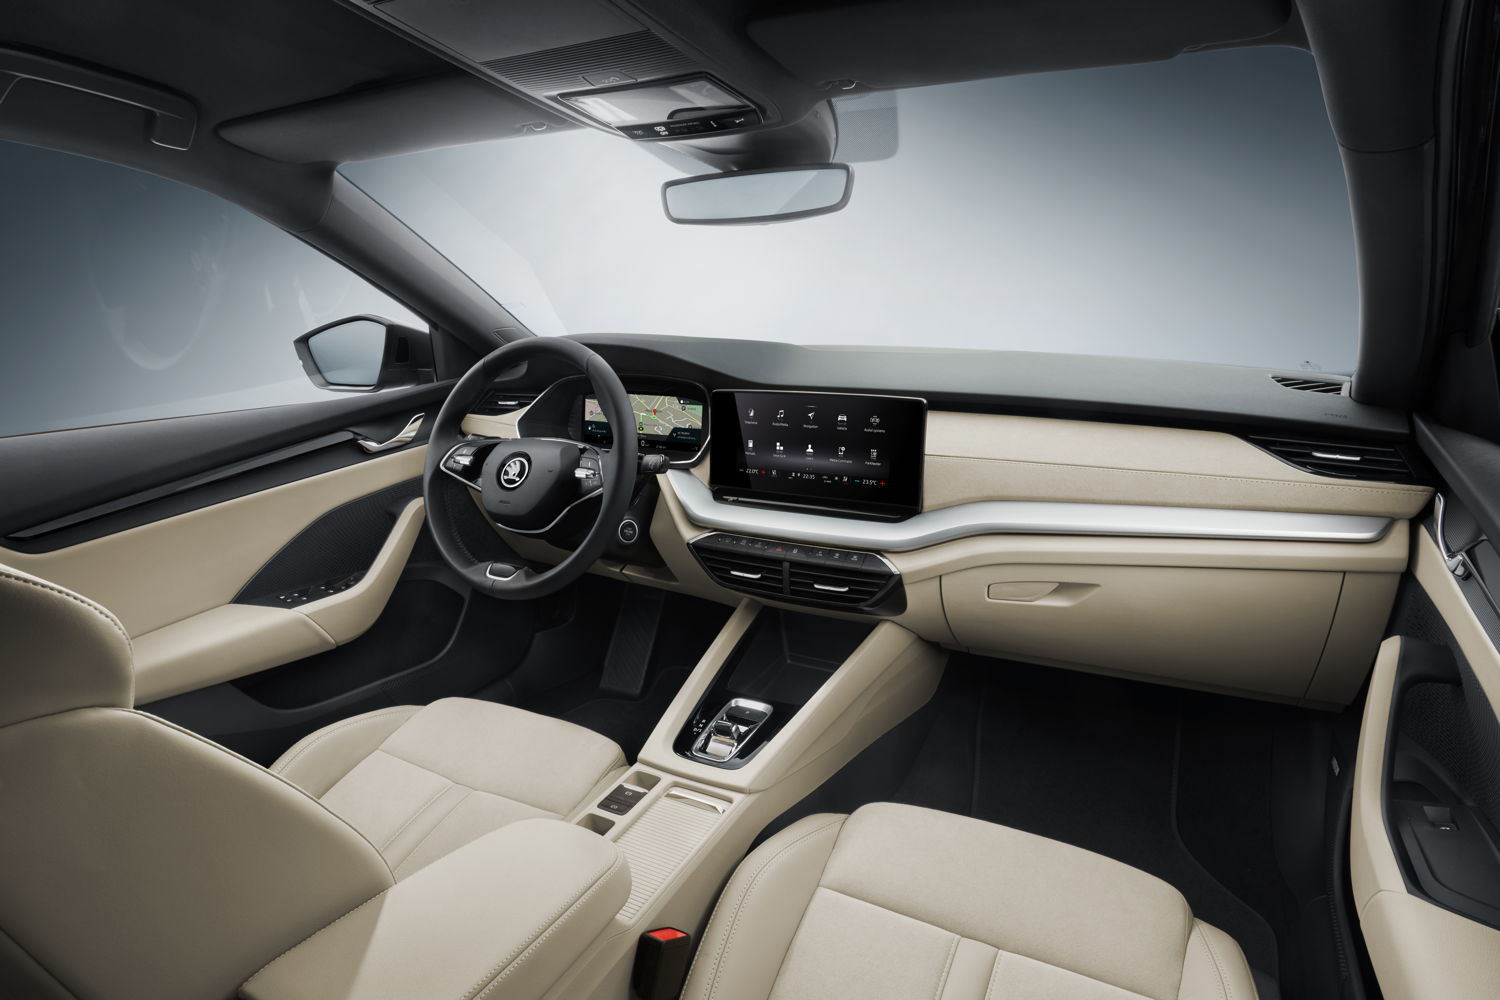 The heart of the Columbus, Swing and Bolero (by end of 2020) infotainment systems in the new OCTAVIA is the free-standing central display with a screen diagonal of 10 inches – the largest ever in a ŠKODA model.